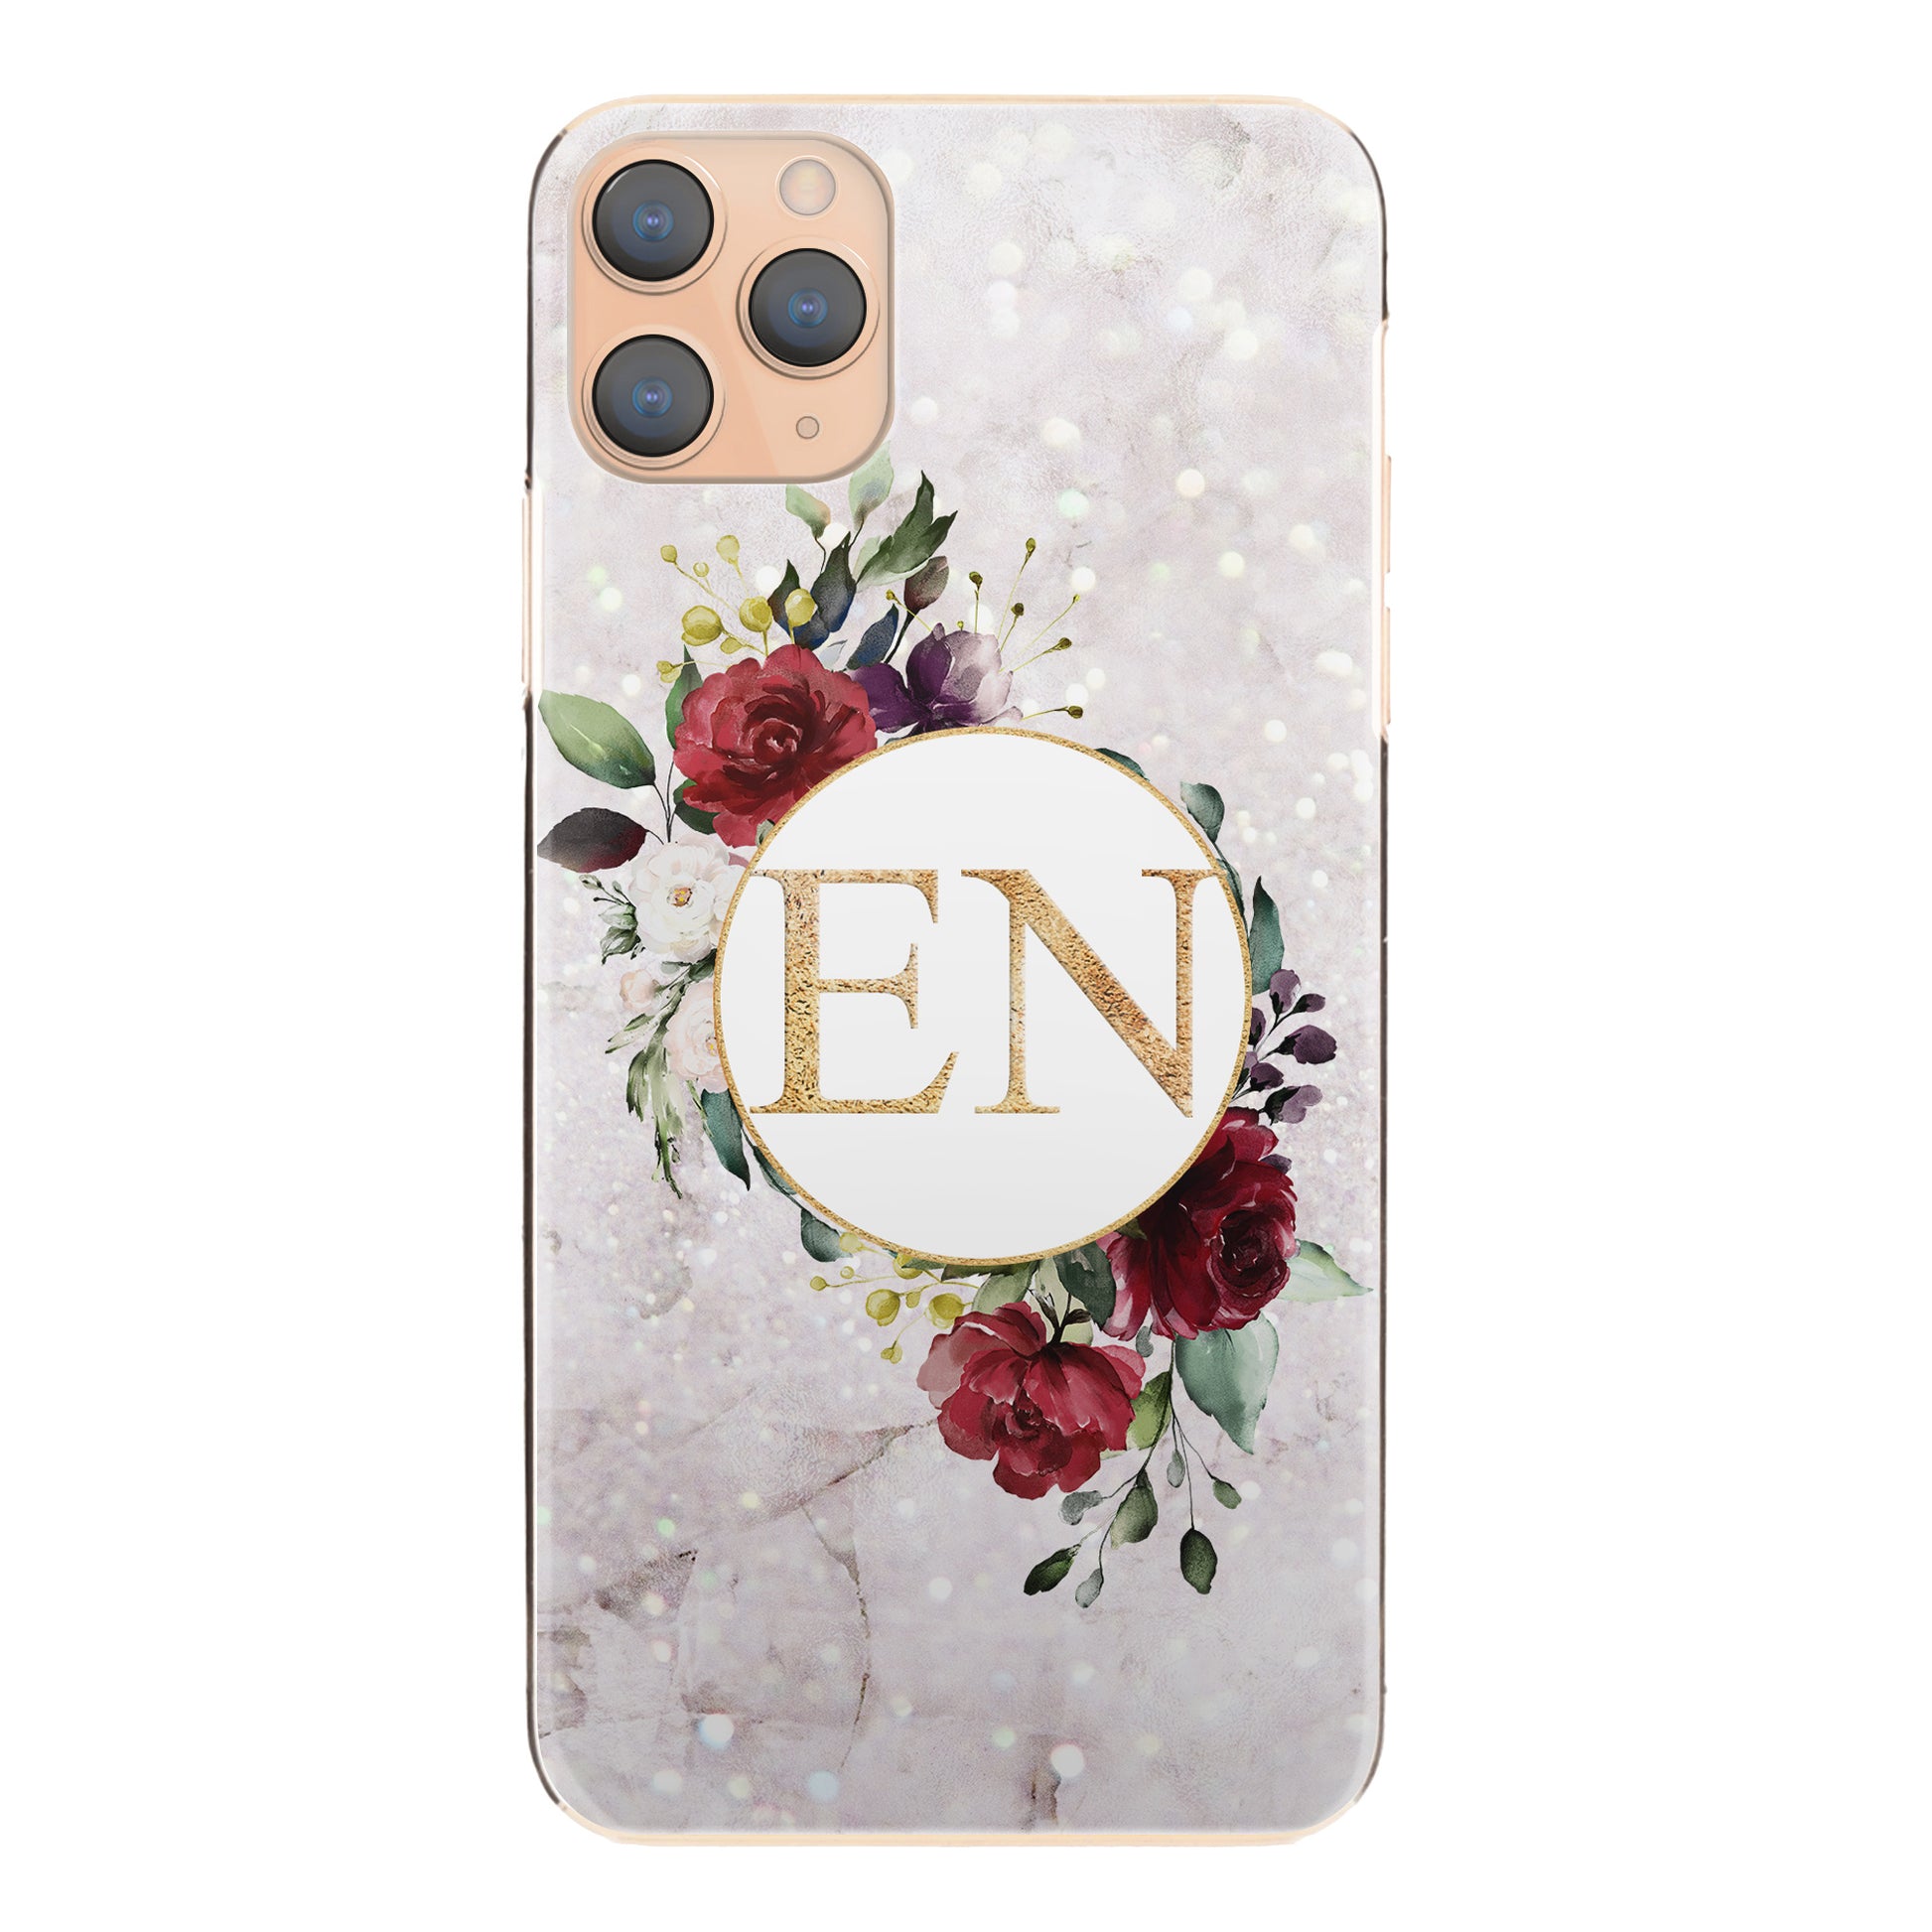 Personalised Motorola Phone Hard Case with Floral Gold Initials on Crystal Marble